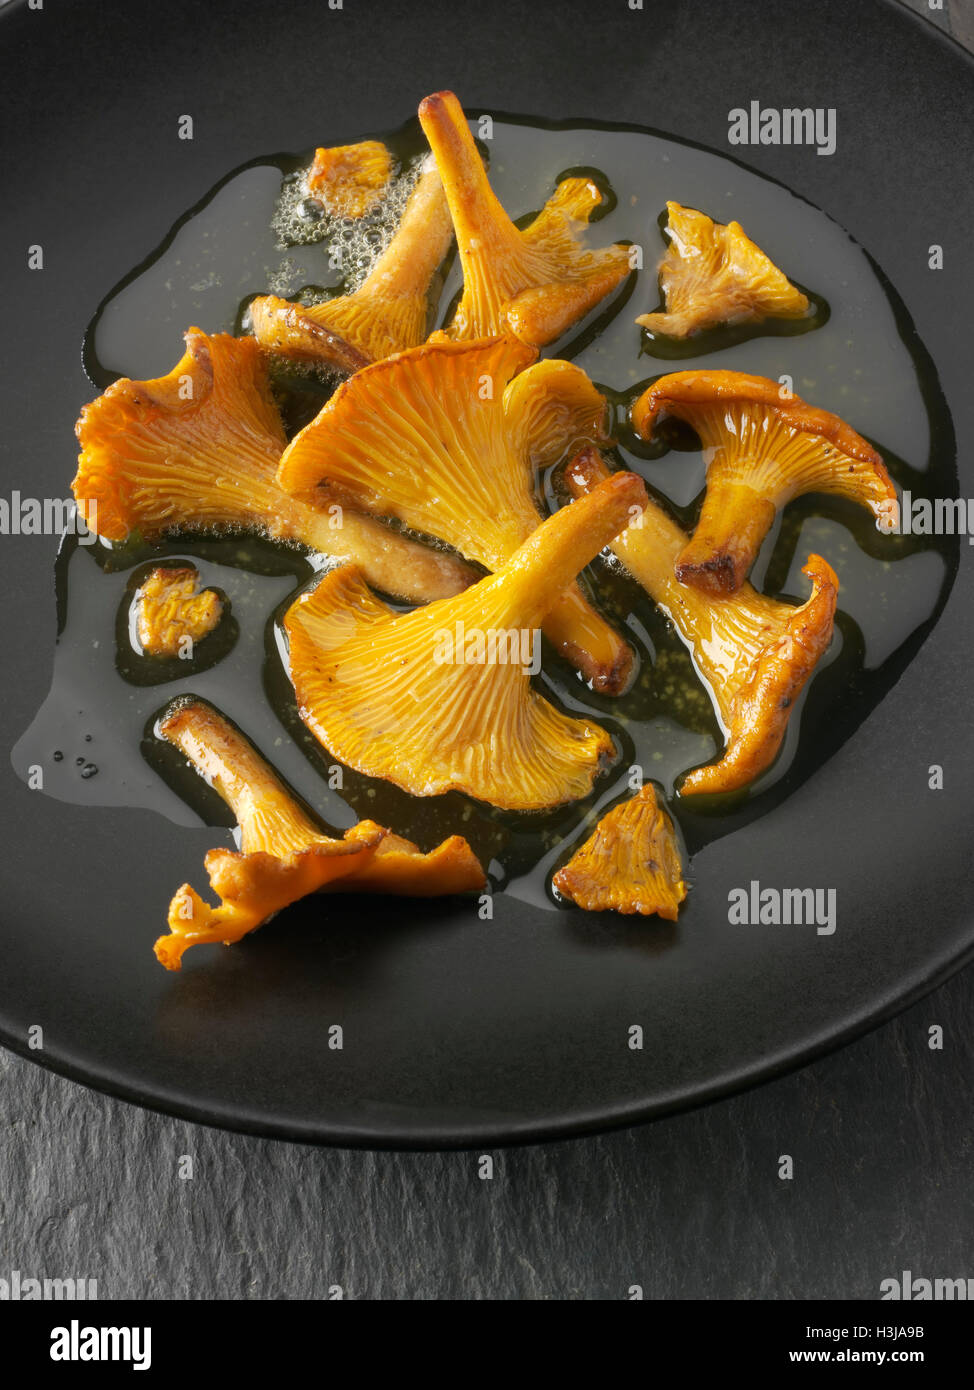 Wiild organic chanterelle or girolle Mushrooms (Cantharellus cibarius) or sauteed in butter Stock Photo